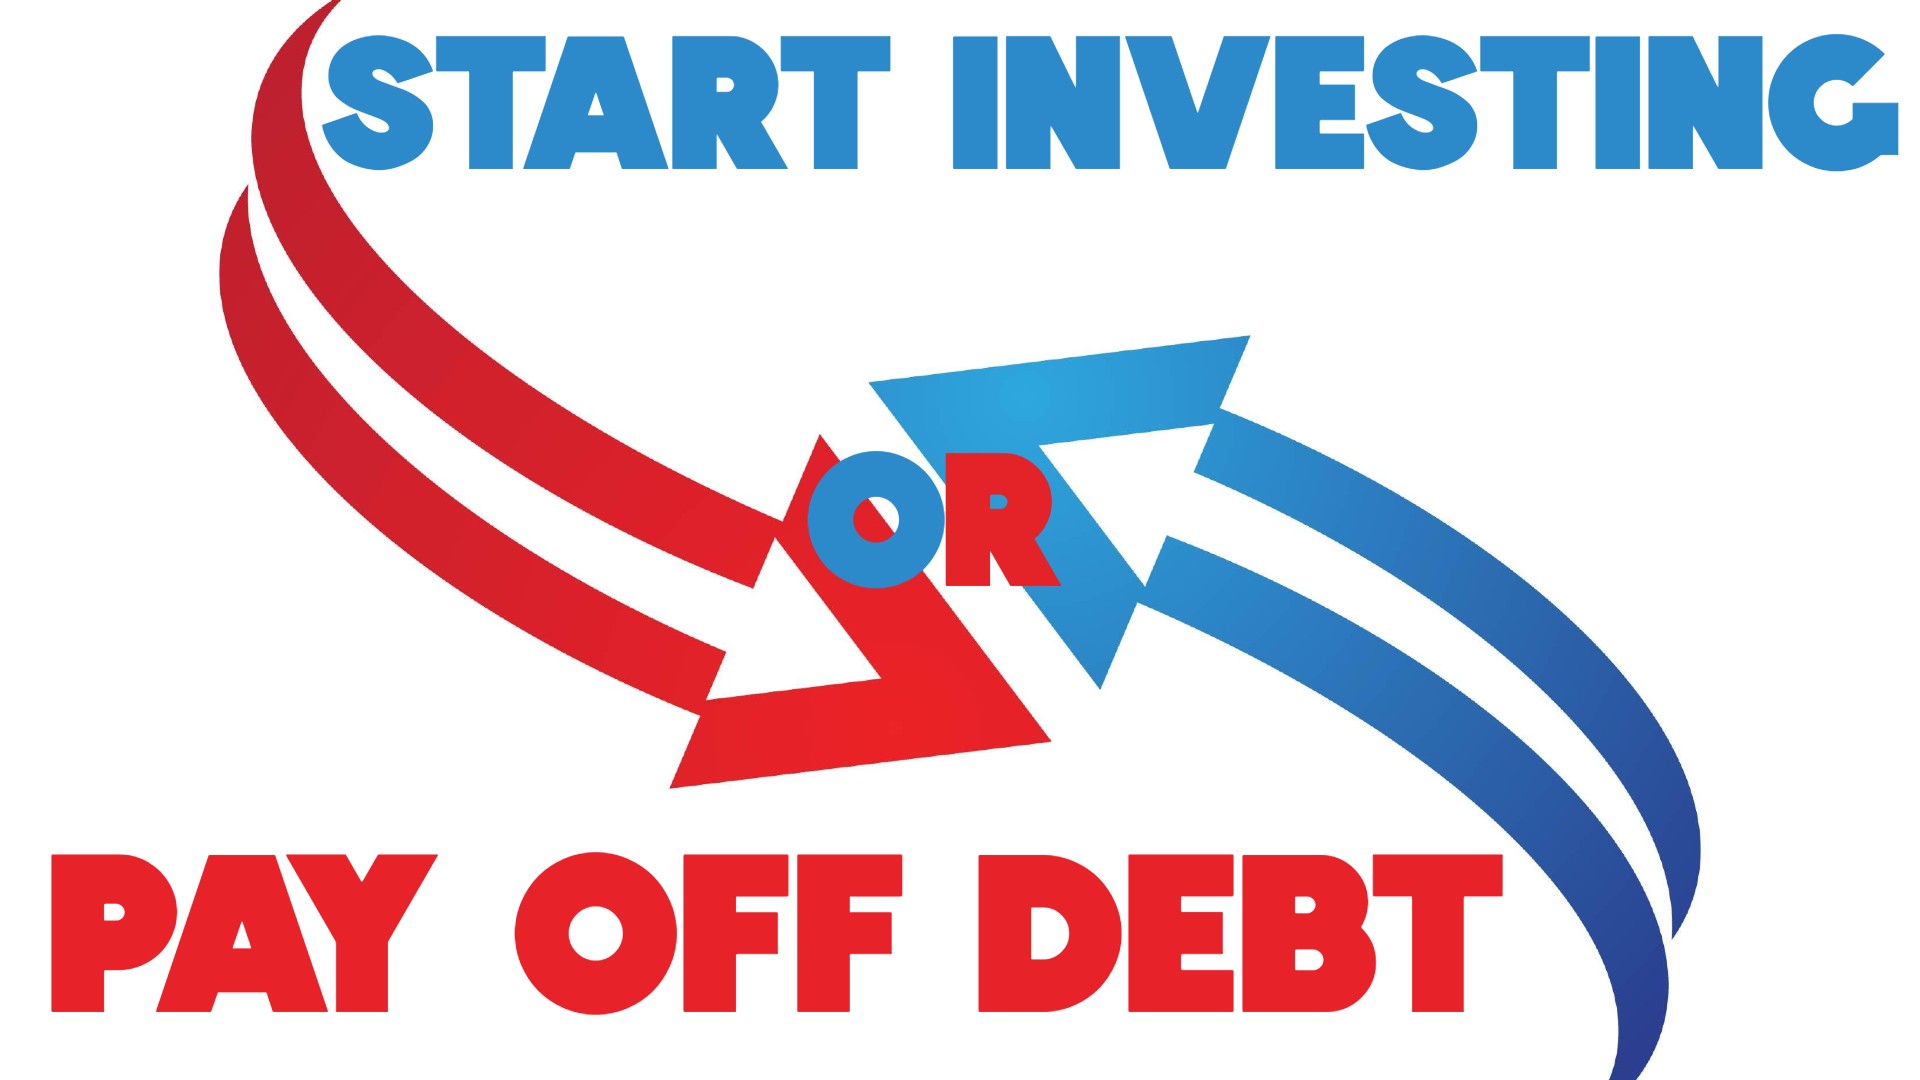 Pay Off Debt or Start Investing?